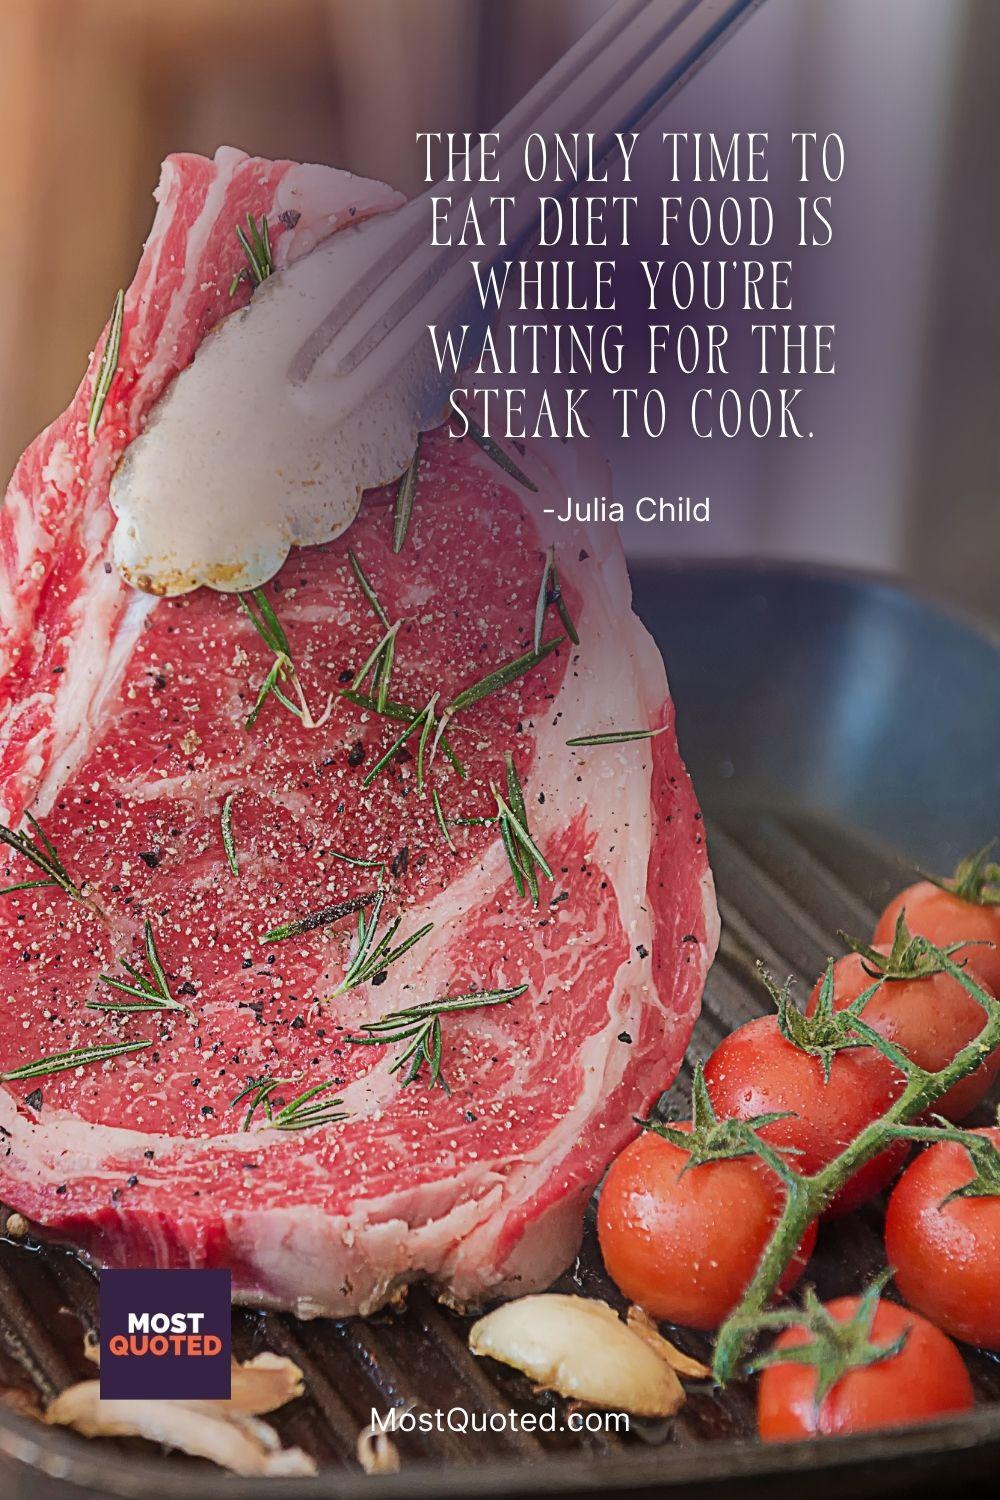 The only time to eat diet food is while you’re waiting for the steak to cook. - Julia Child